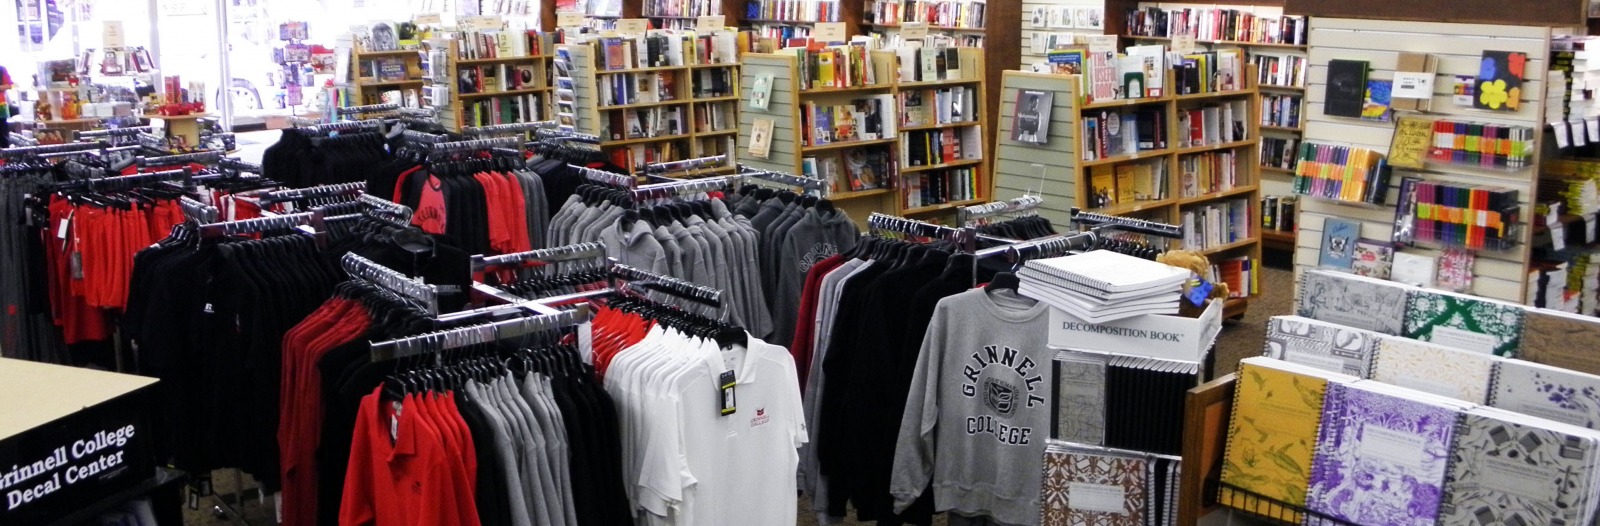 The interior of the Pioneer Bookshop showing merchandise